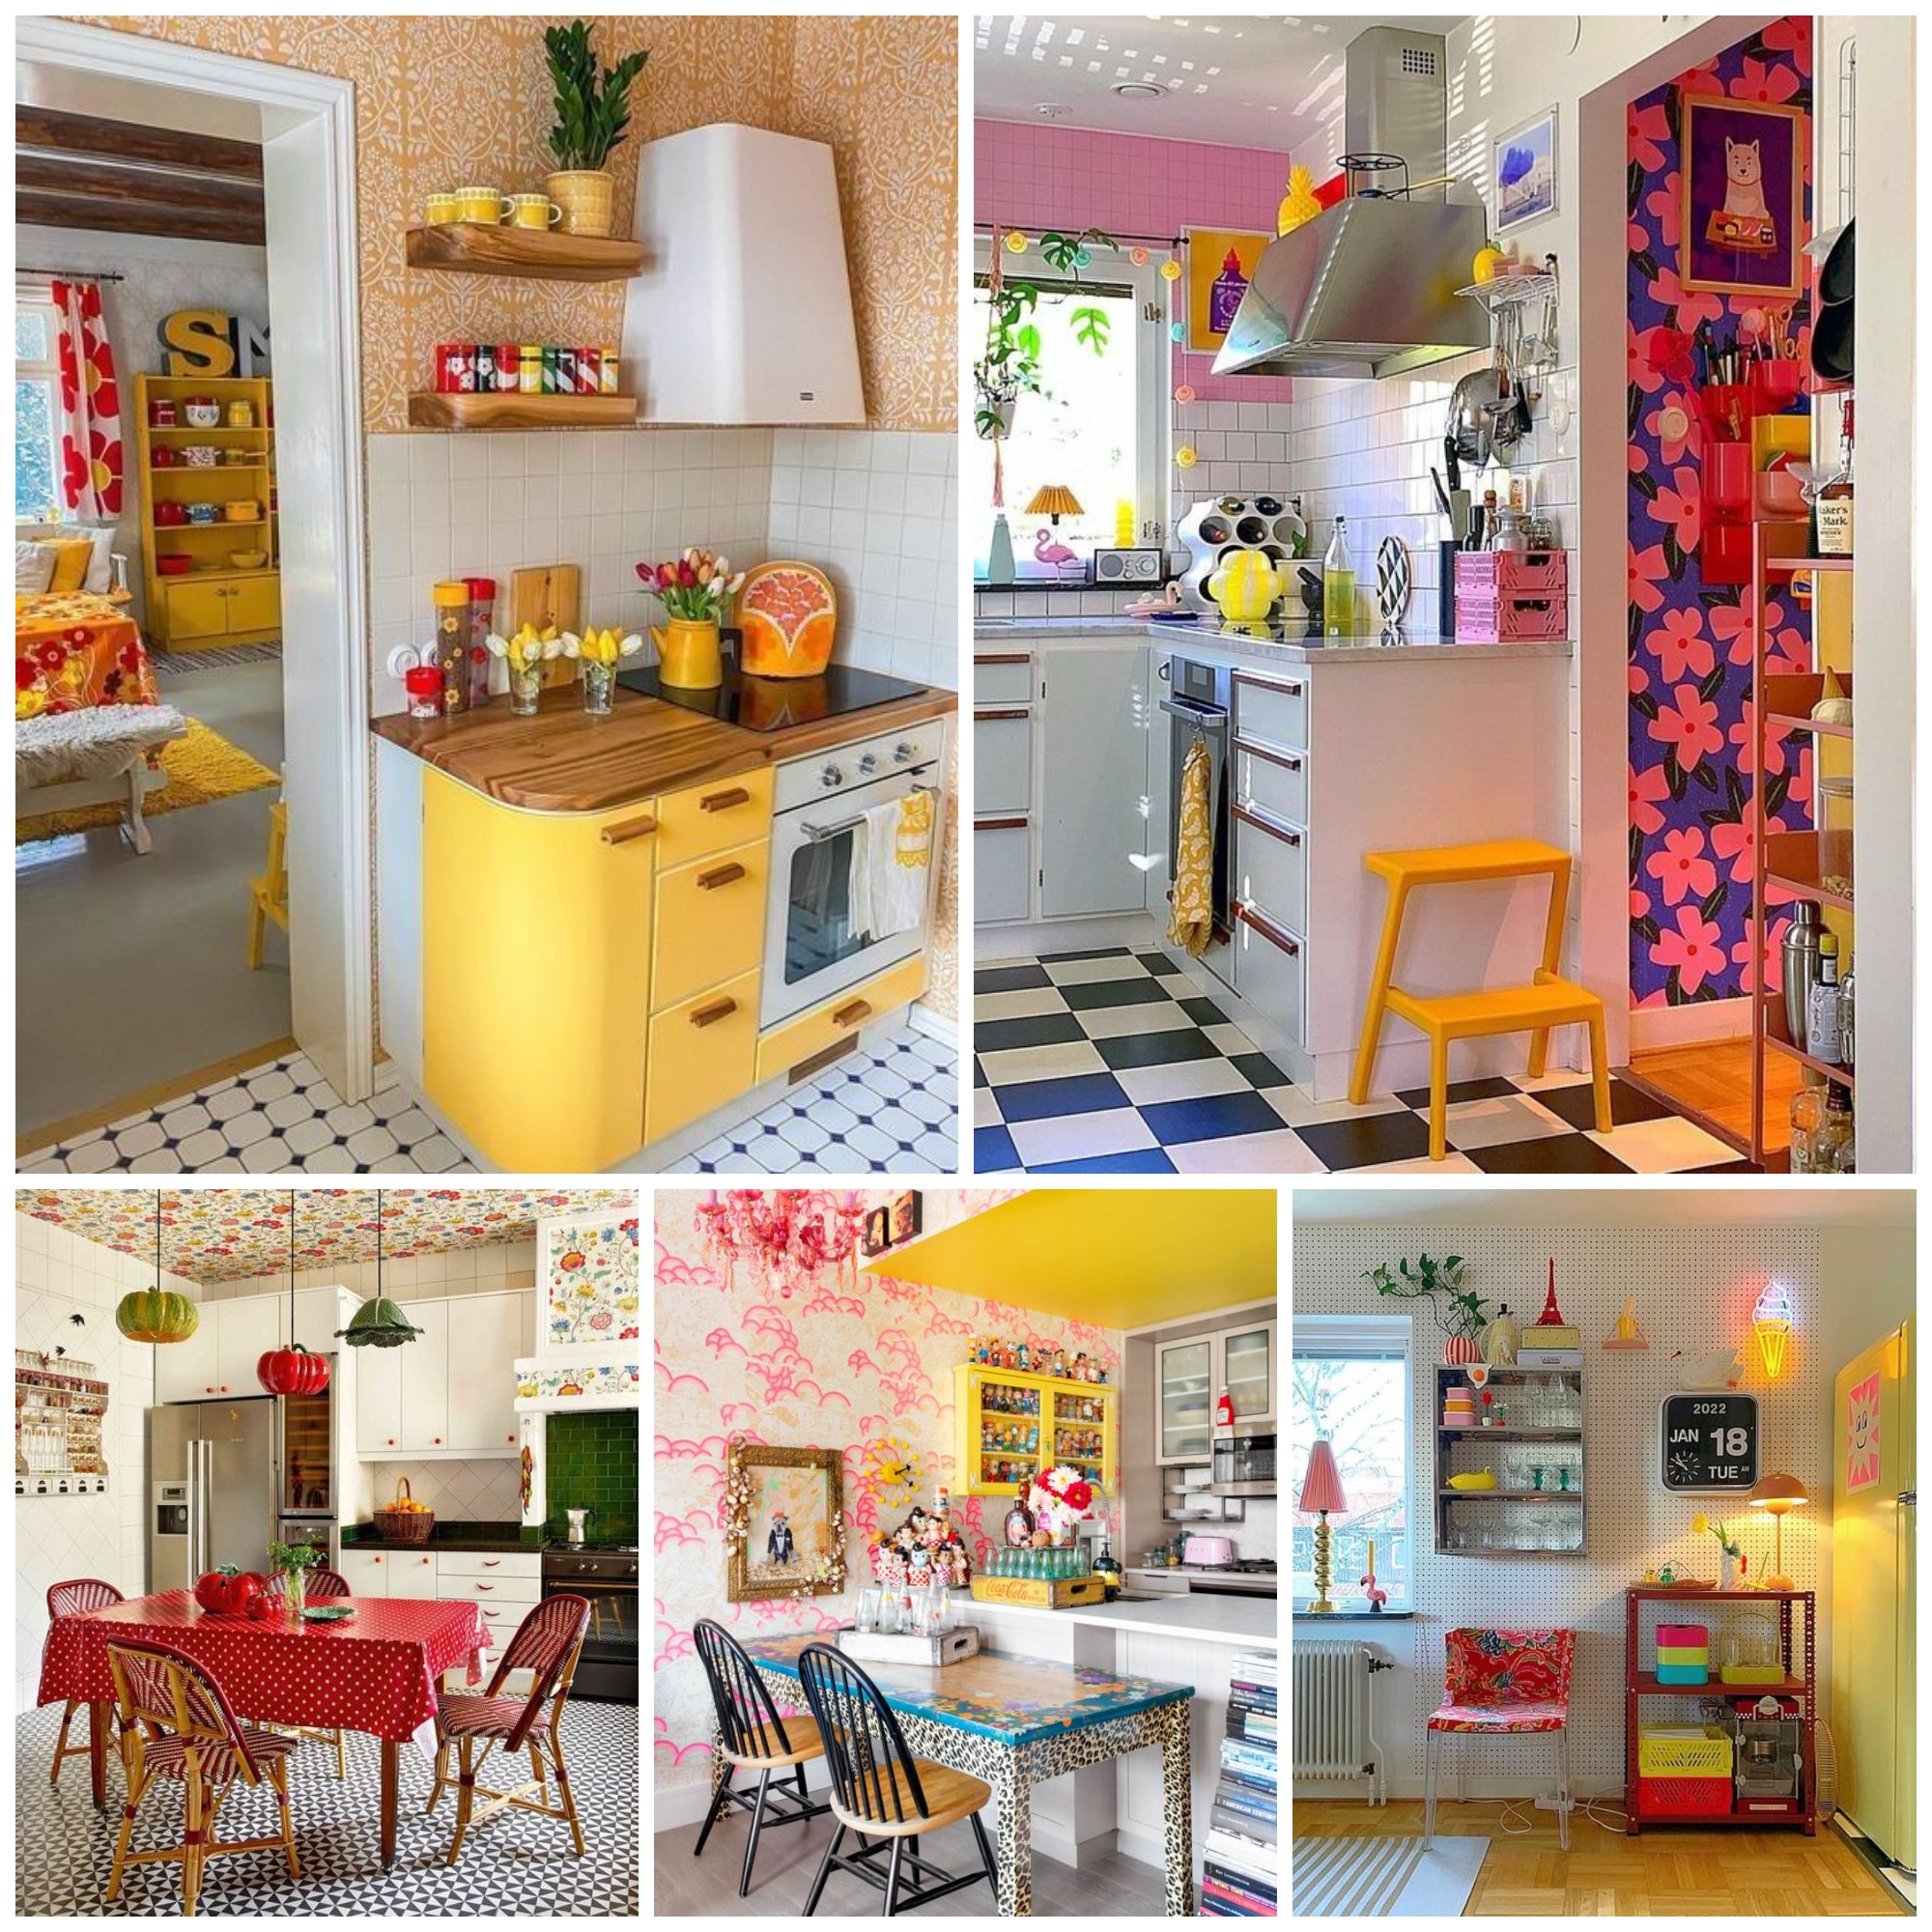 70+ Kitchens That Make A Case For Color